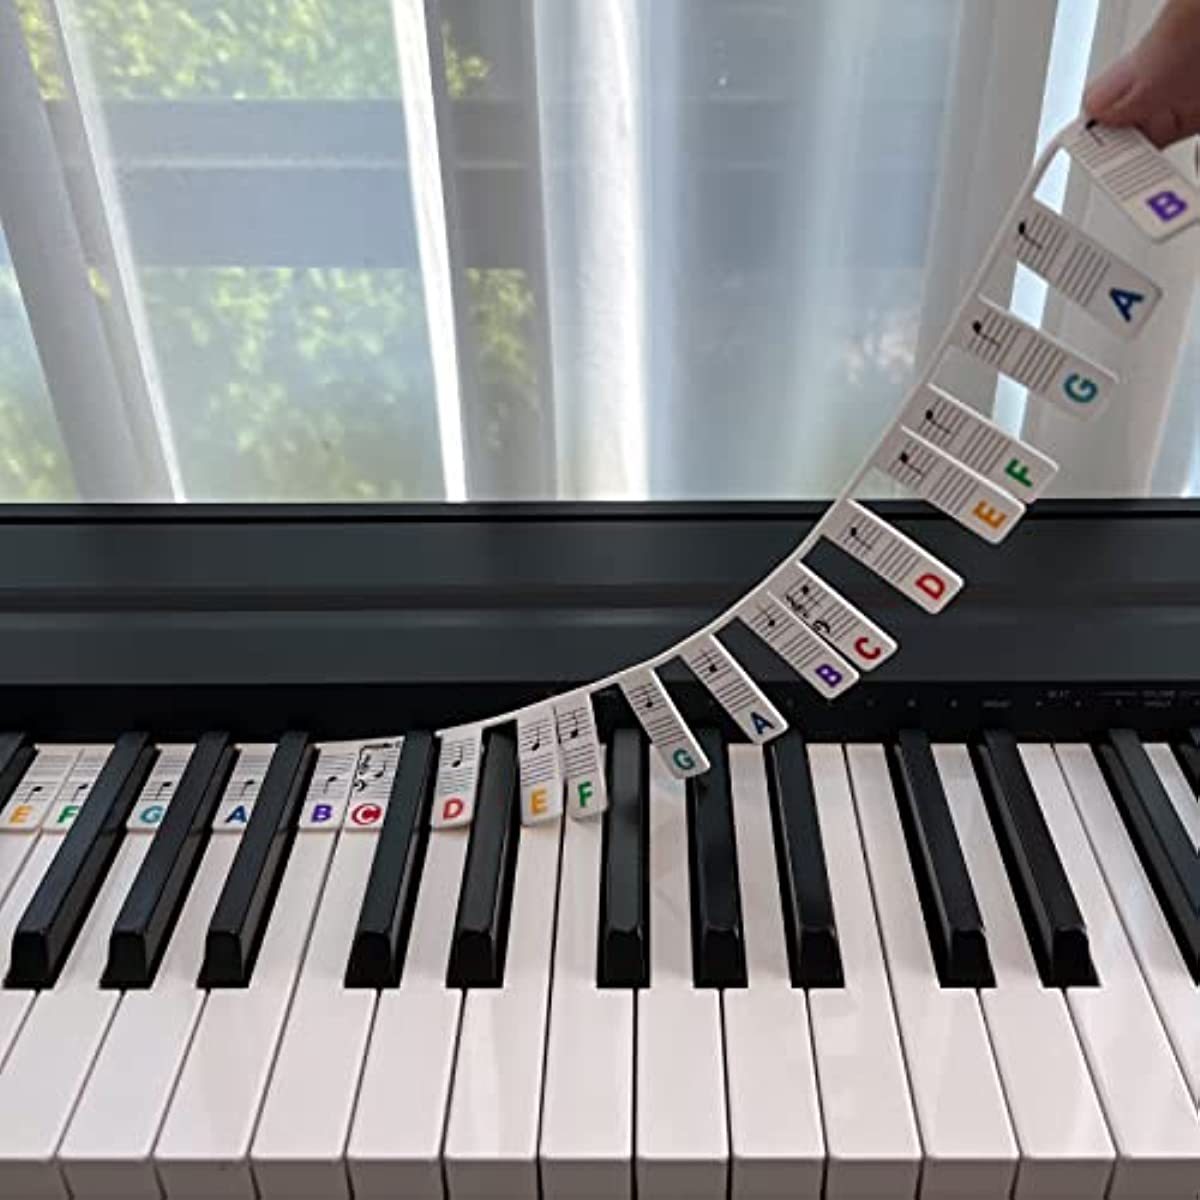 

Piano Notes Guide For Beginner, Removable Piano Keyboard Note Labels For Learning, 88-key Full Size, Made Of Silicone, No Need Stickers, Reusable, For Kids Student